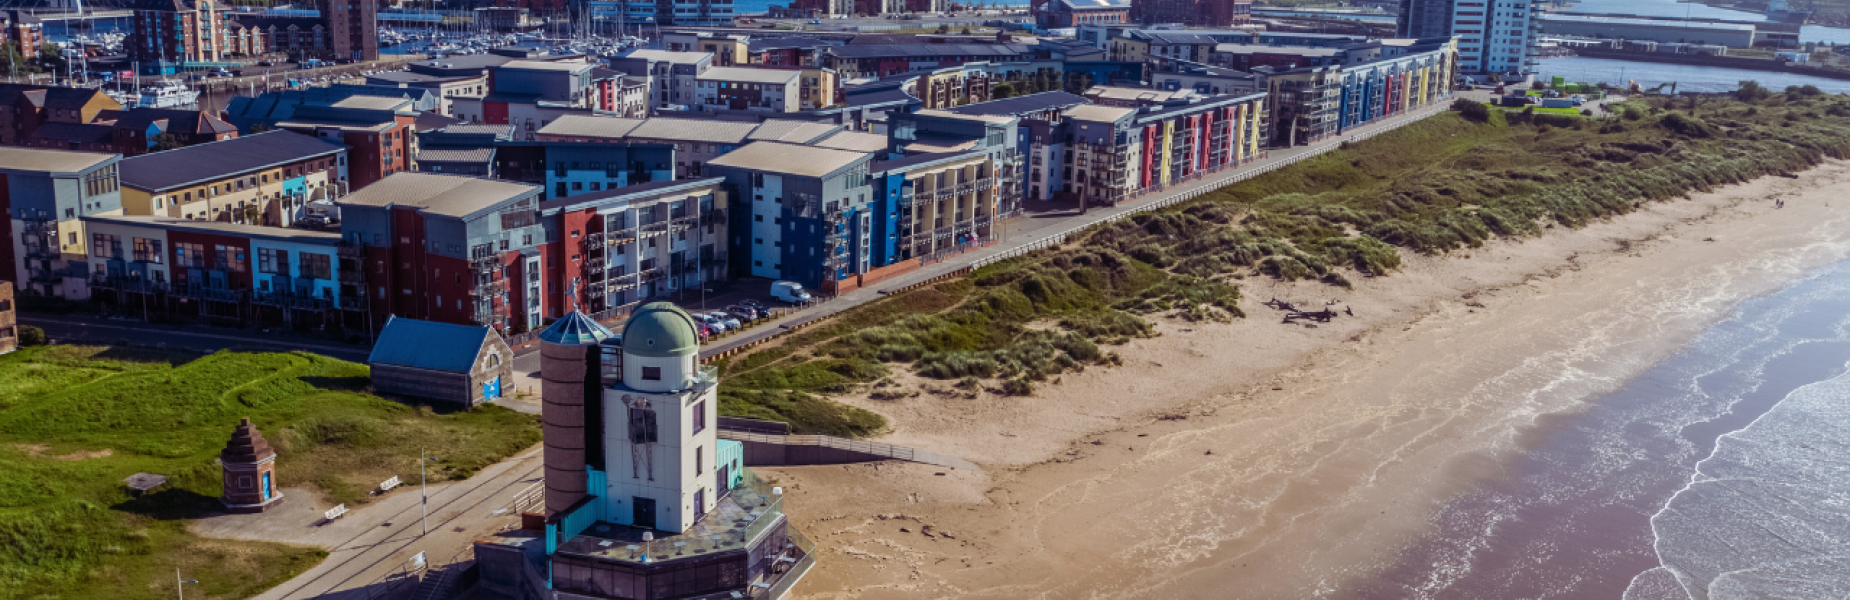 an aerial view of Swansea bay